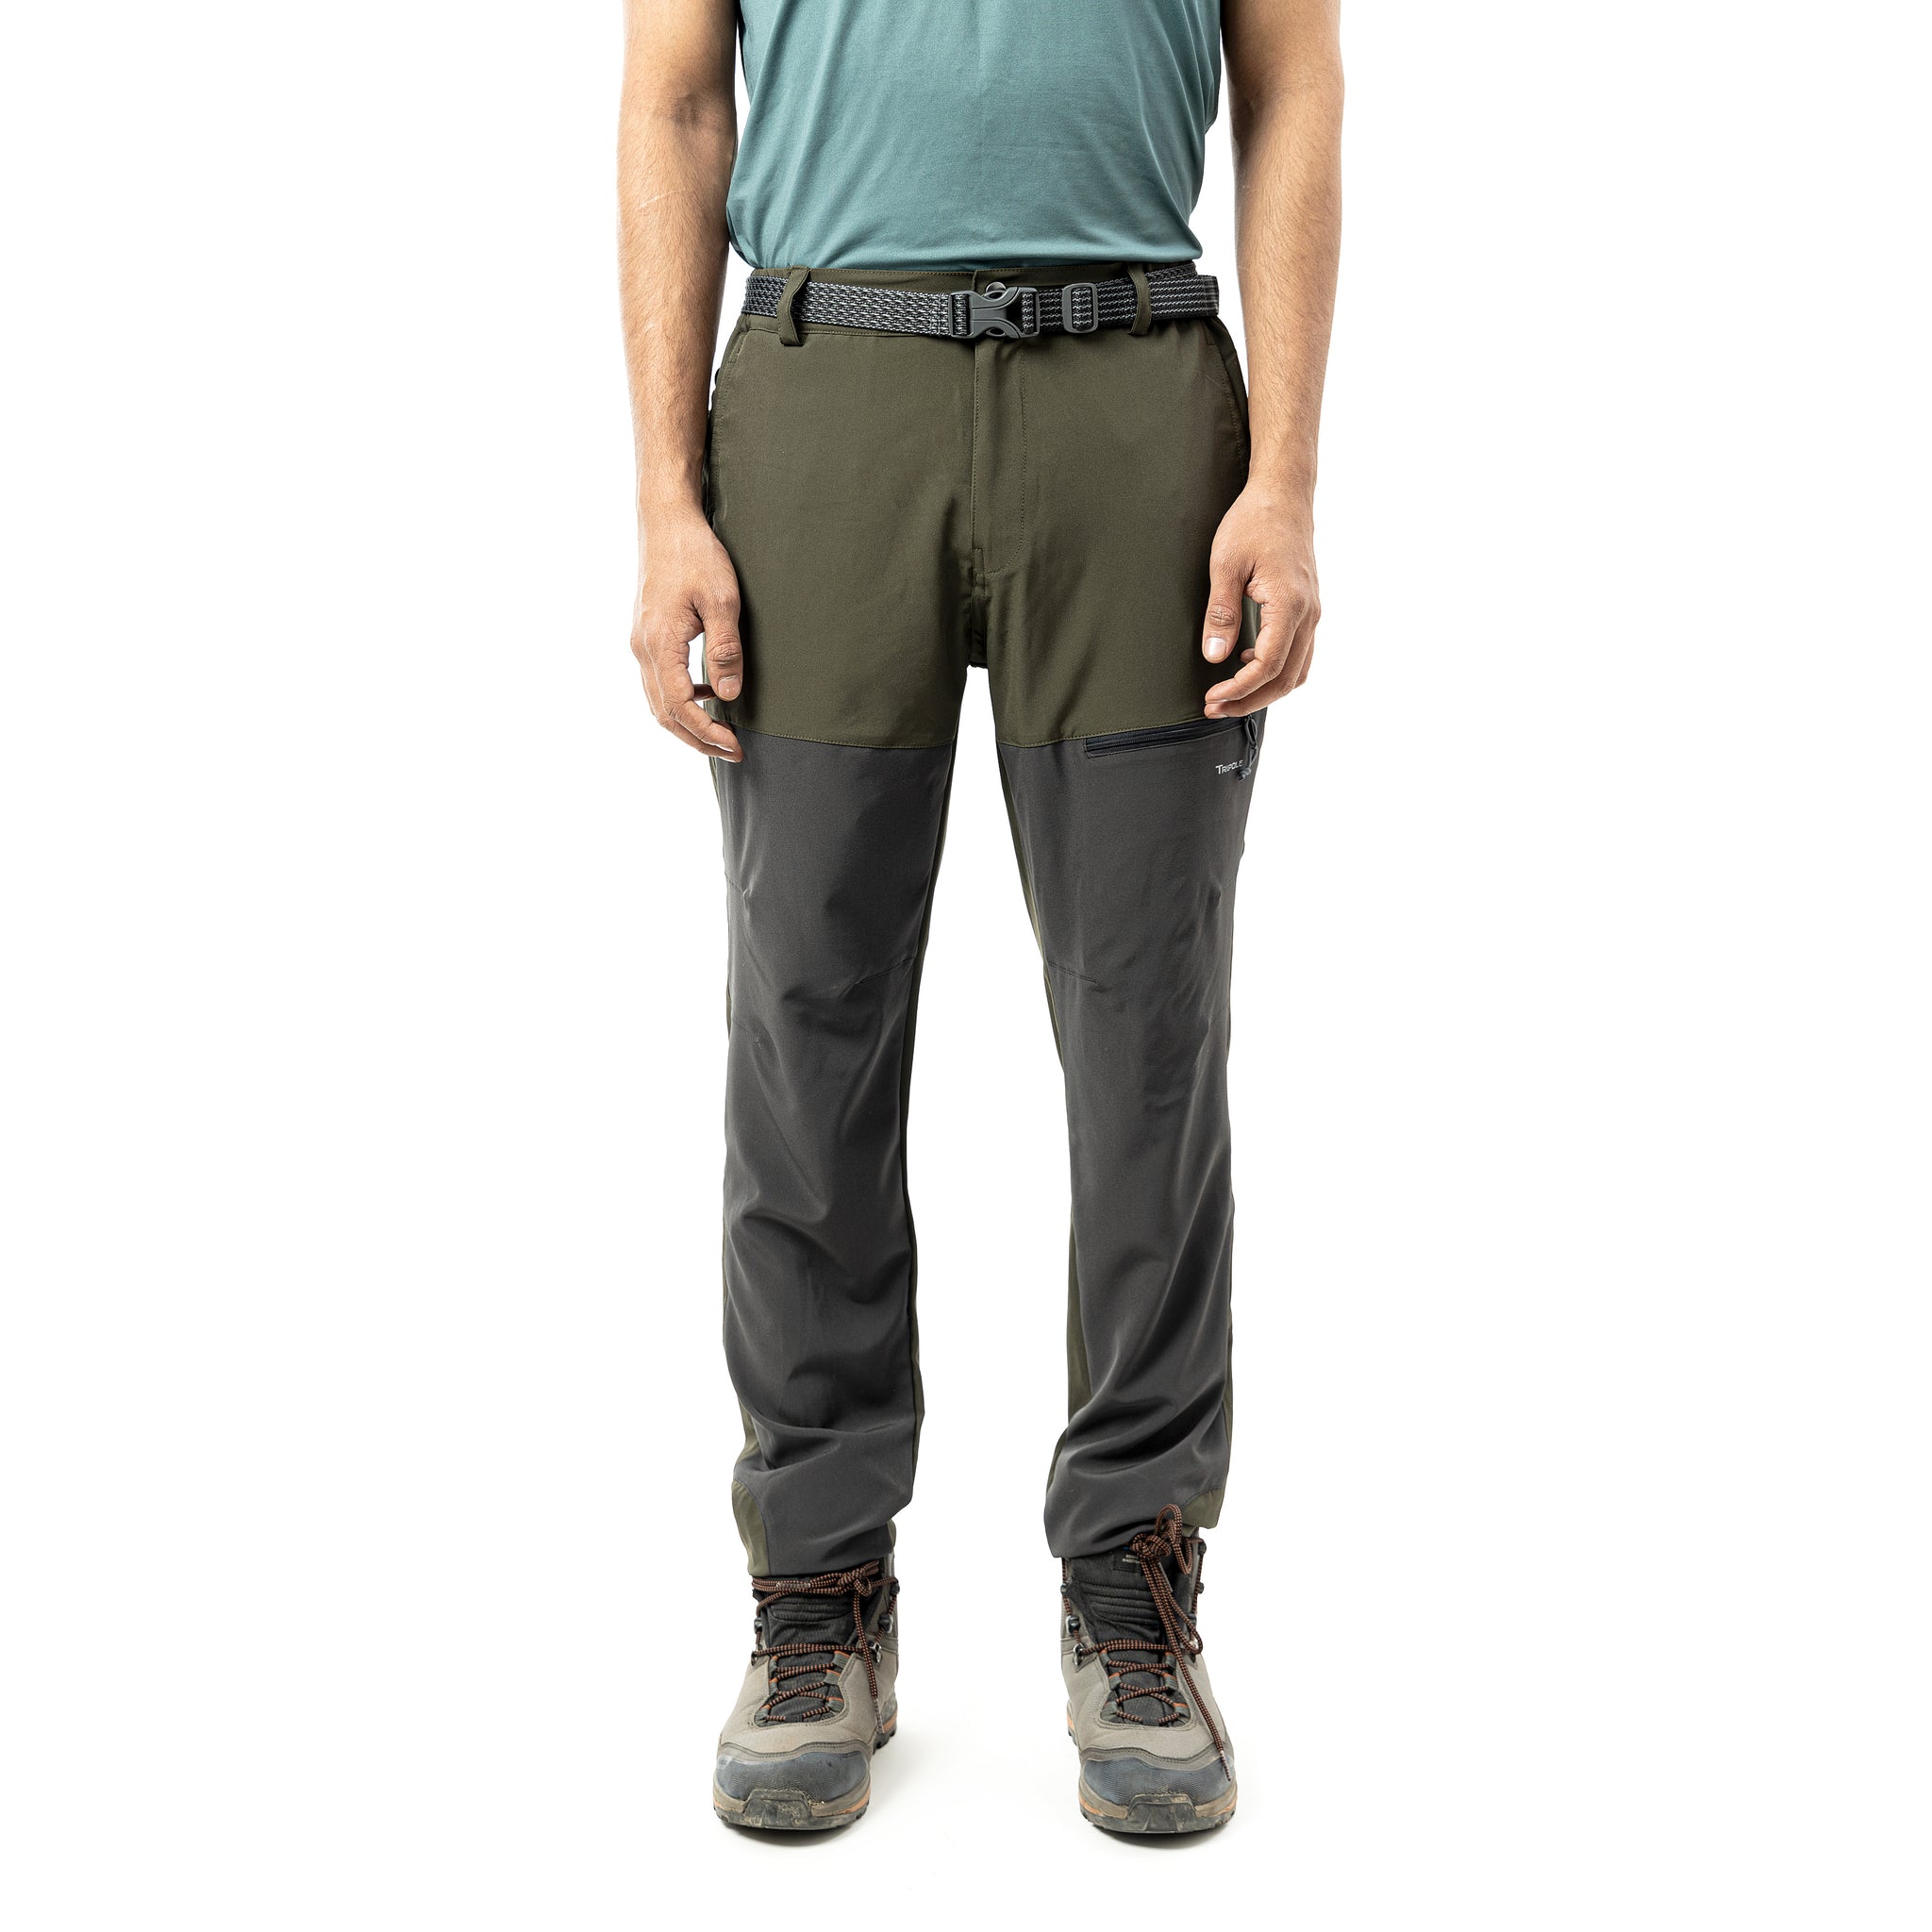 Buy Triple Canyon Fall Hiking Pant for Men and Women Online at Columbia